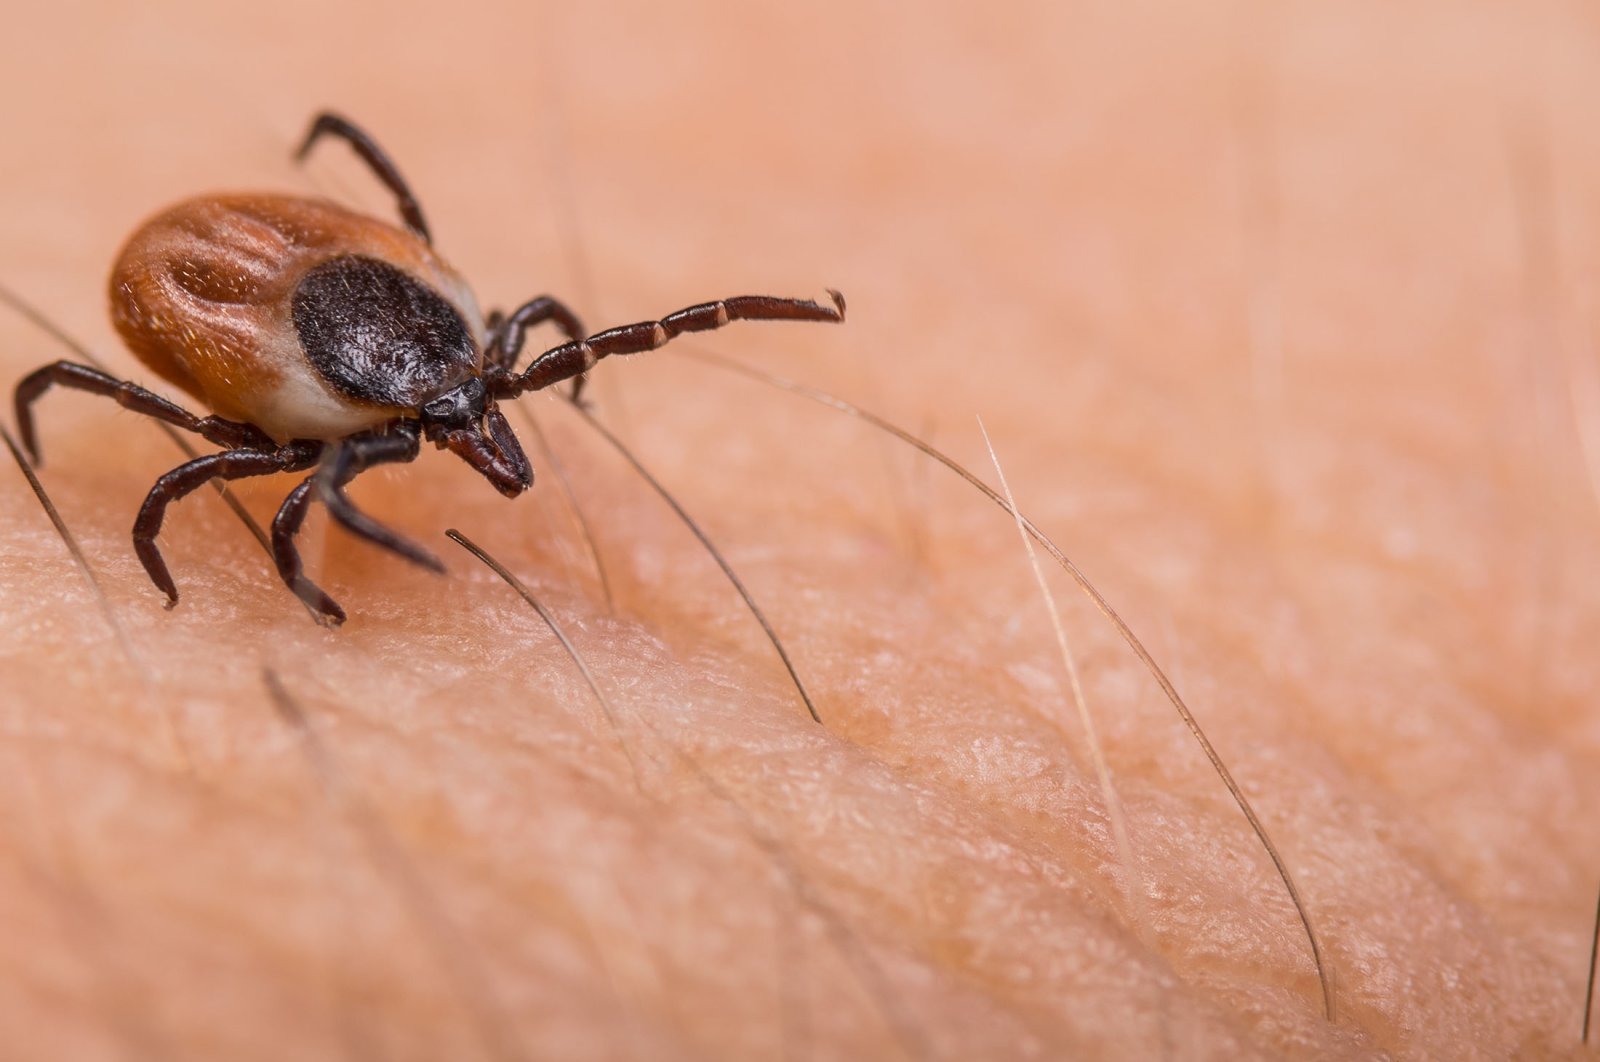 Experts have warned against dangers of ticks with the arrival of hot summer months. (Shutterstock Photo)